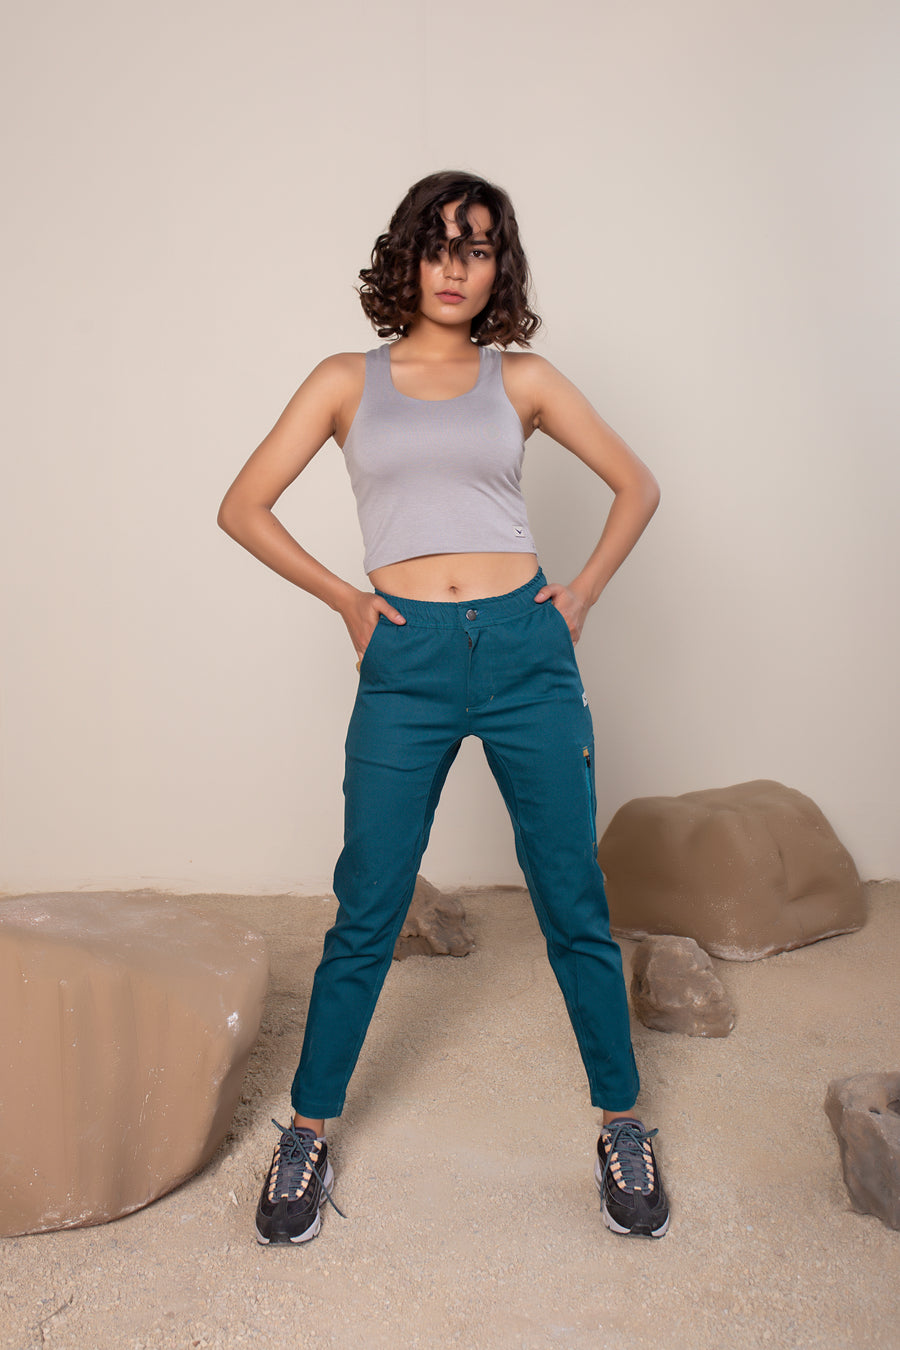 Women's Sequoia Canvas Pant in Teal | VOLO Apparel | Made with an ultra durable stretch cotton canvas, the Sequoia Canvas Pant is our ultimate six pocket lifestyle pant. Featuring a modern slim fit and a 33 inch inseam, a 3 point gusset, snap button security pockets, 2 zipper pockets and the comfort of durable canvas, these are your go to adventure pants that can handle anything you throw at them.